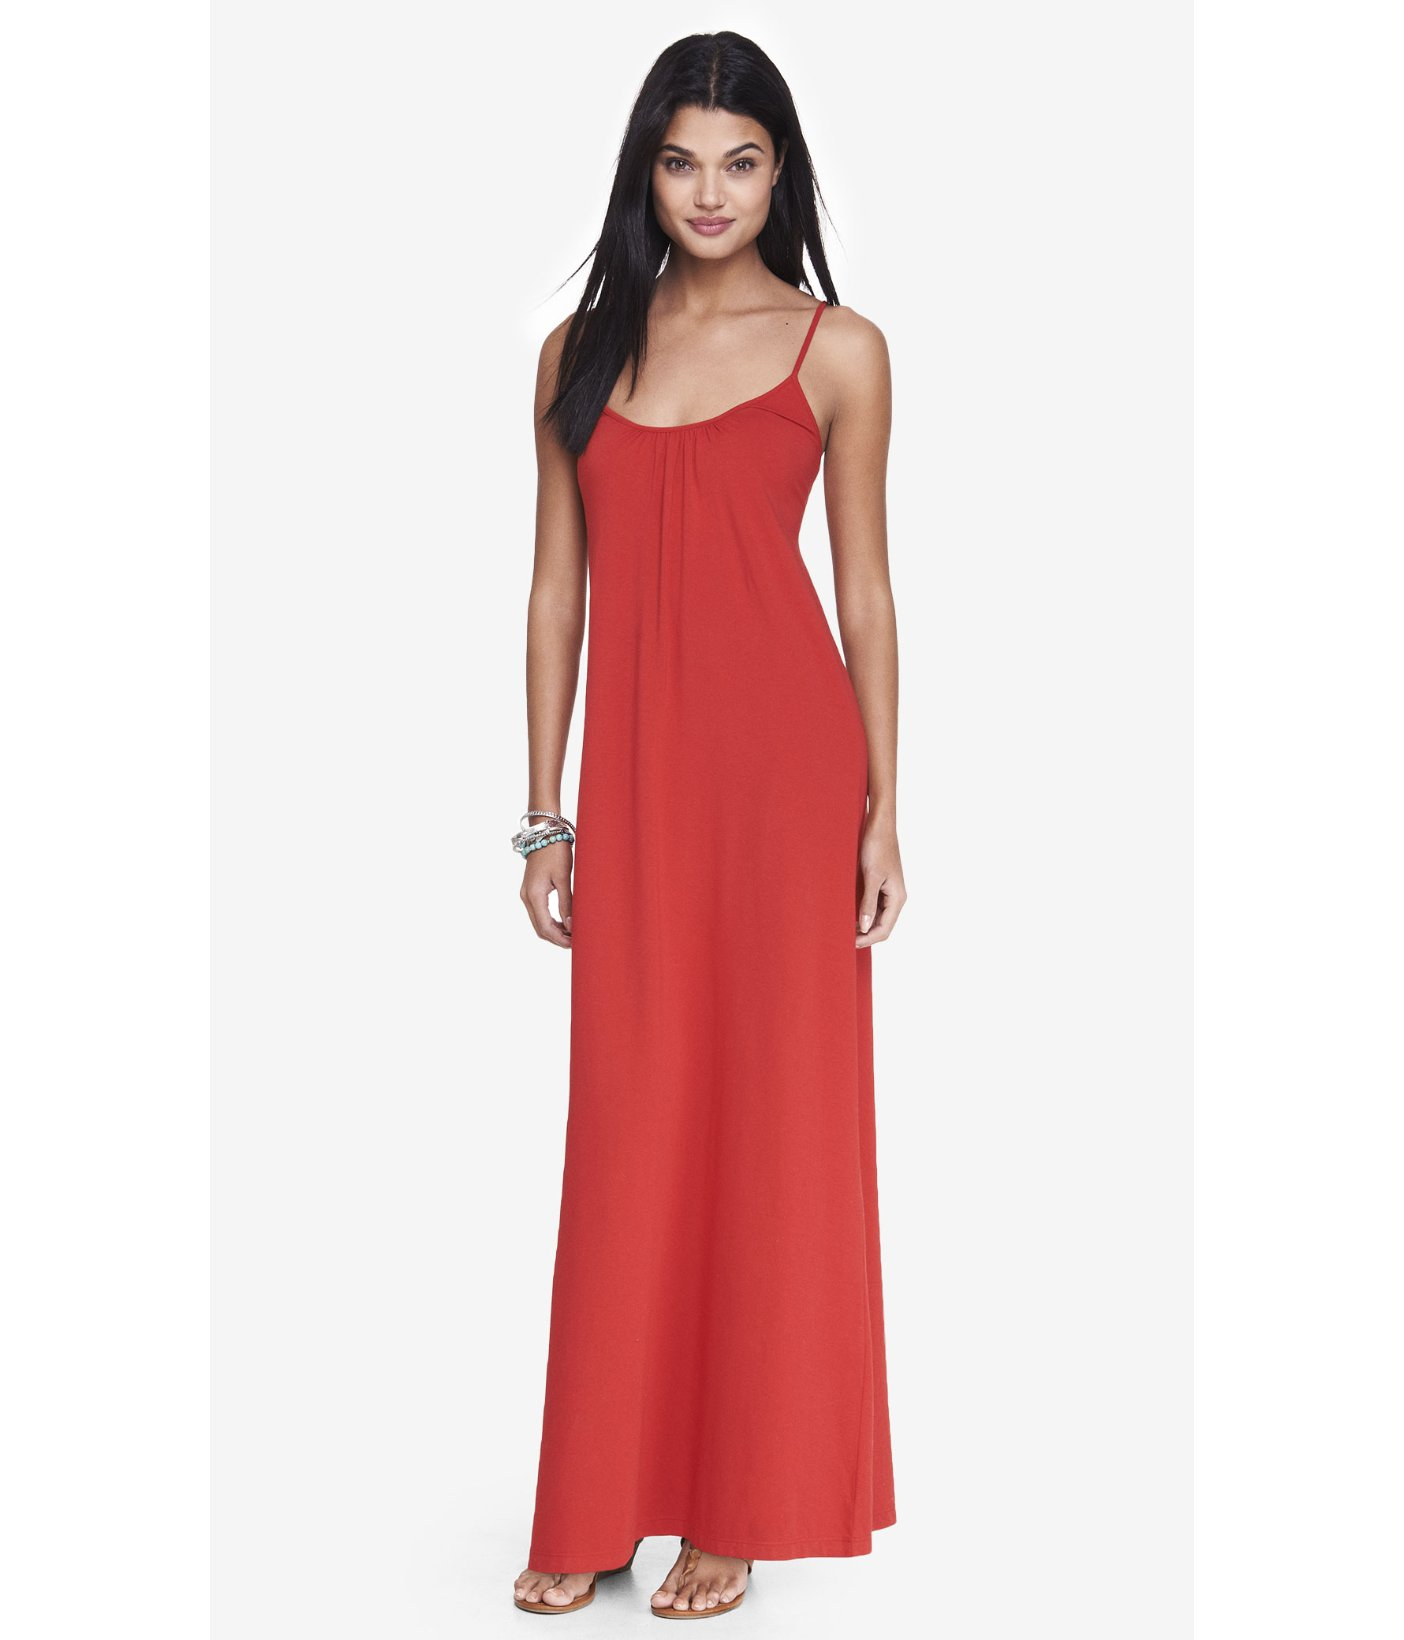 Lyst - Express Red Cut-Out Back Maxi Dress in Red